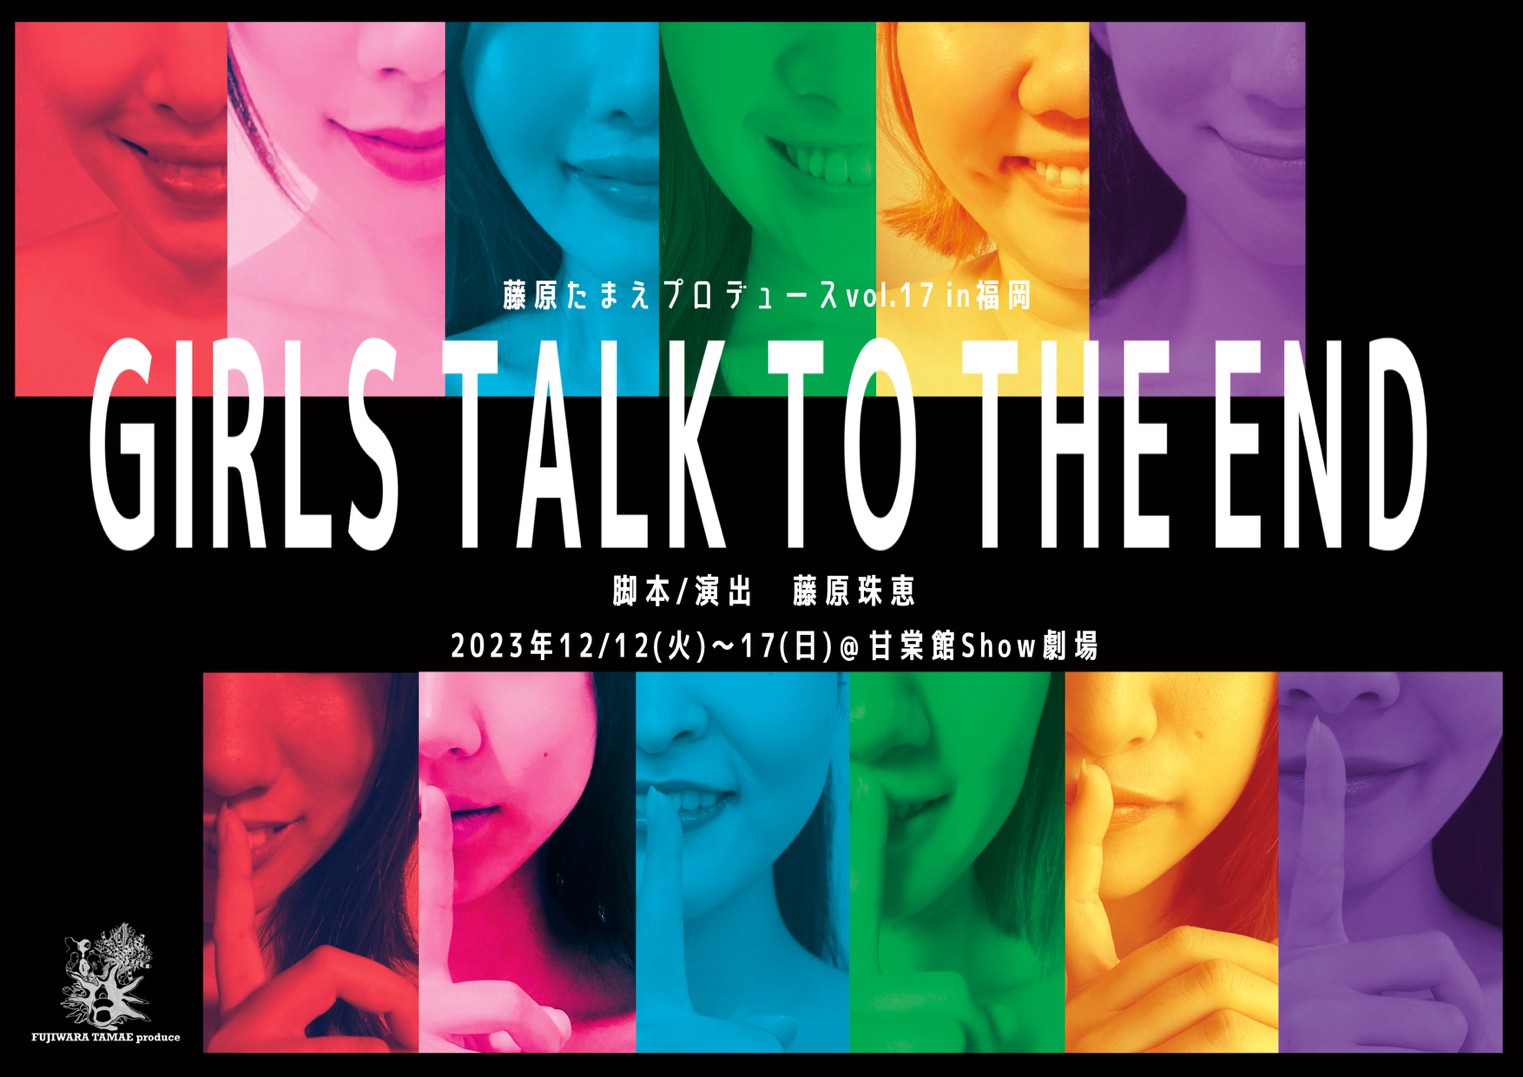 GIRLS TALK TO THE END